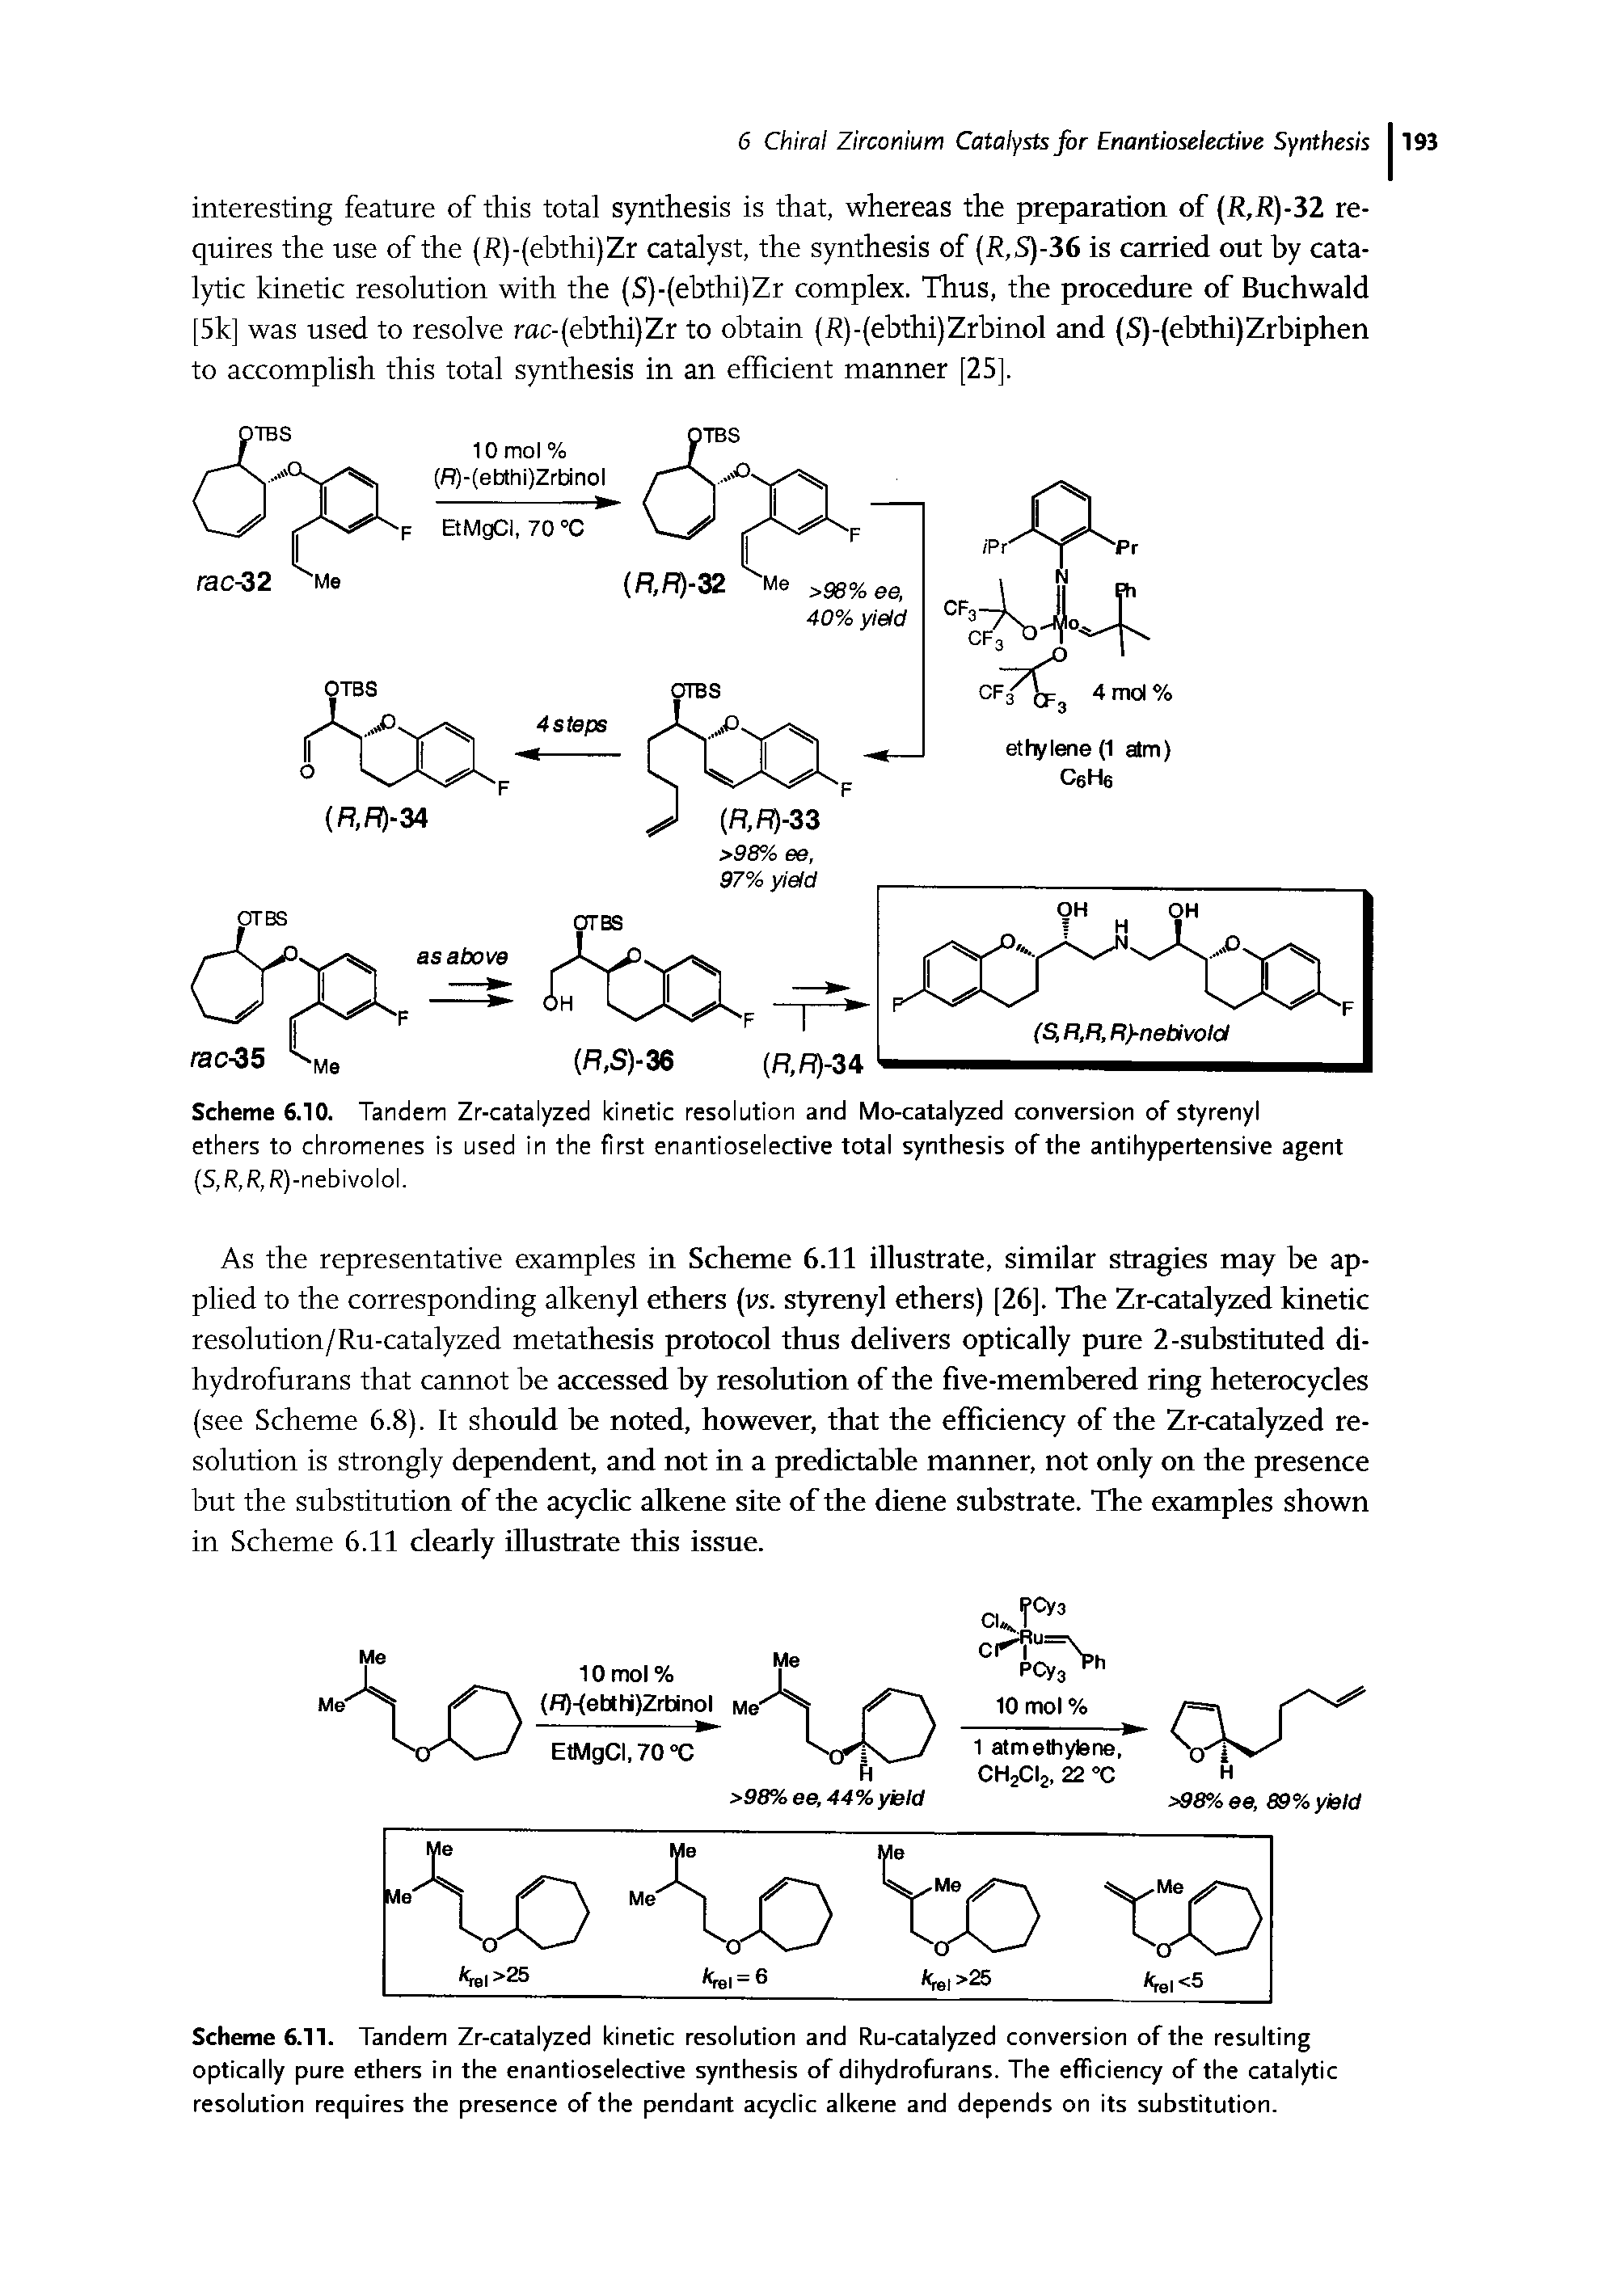 Scheme 6.11. Tandem Zr-catalyzed kinetic resolution and Ru-catalyzed conversion of the resulting optically pure ethers in the enantioselective synthesis of dihydrofurans. The efficiency of the catalytic resolution requires the presence of the pendant acyclic alkene and depends on its substitution.